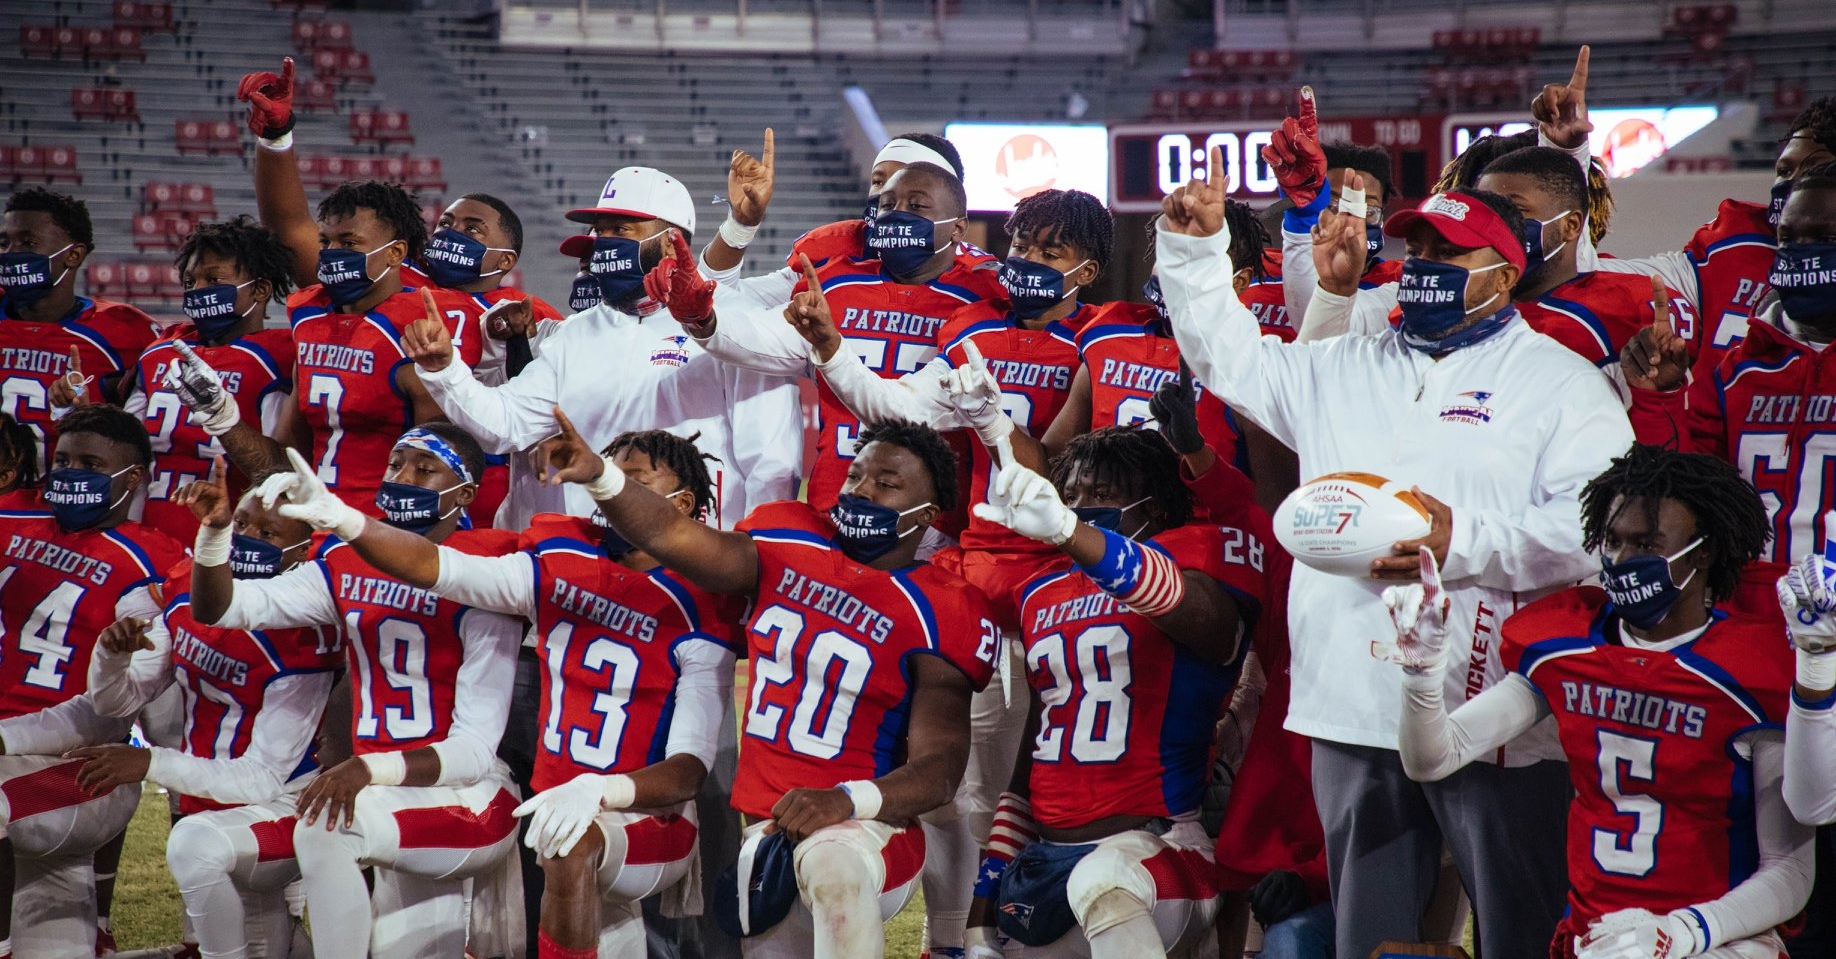 Super 7 high school football championships return to Bham—here’s how to watch at Protective Stadium